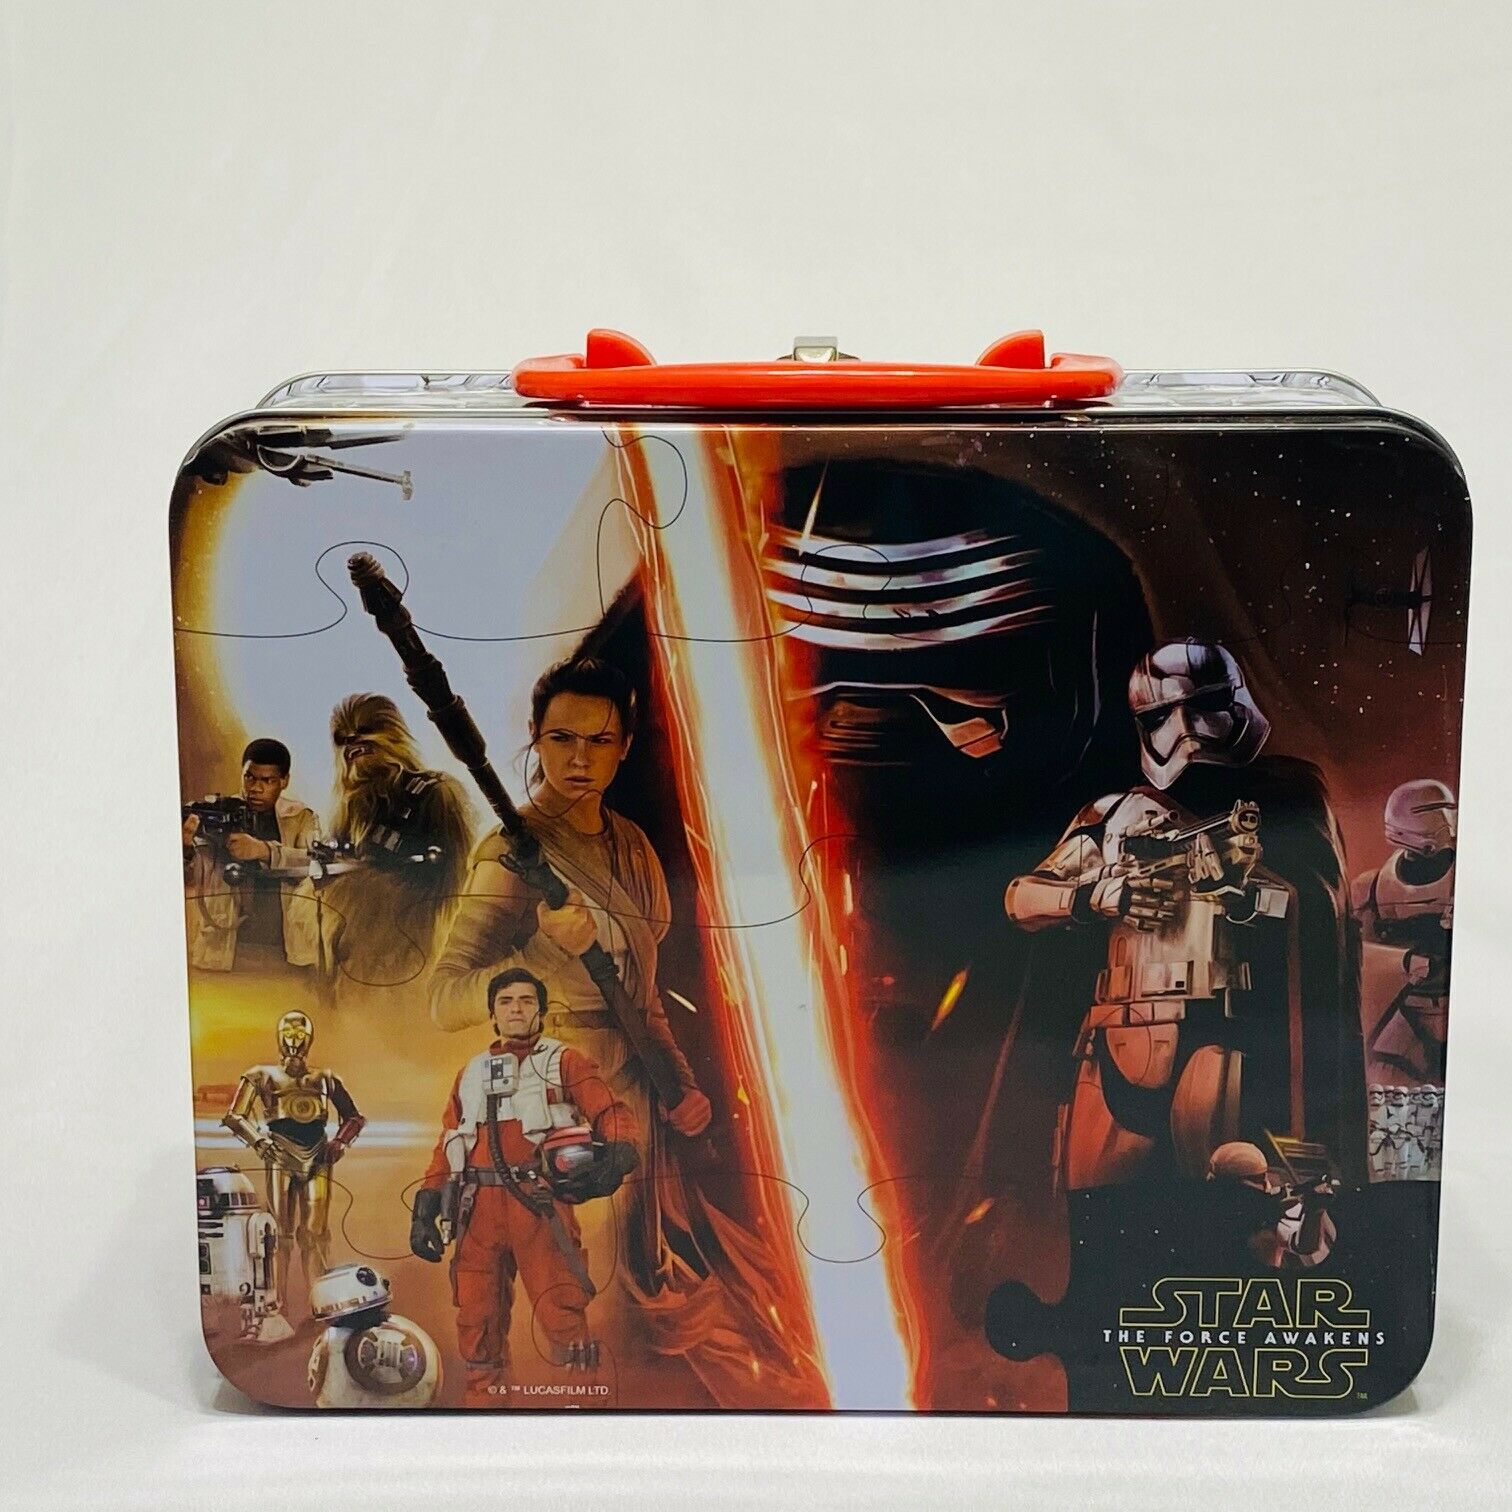 Disney - Star wars the force awakens 100 piece puzzle in tin lunch box